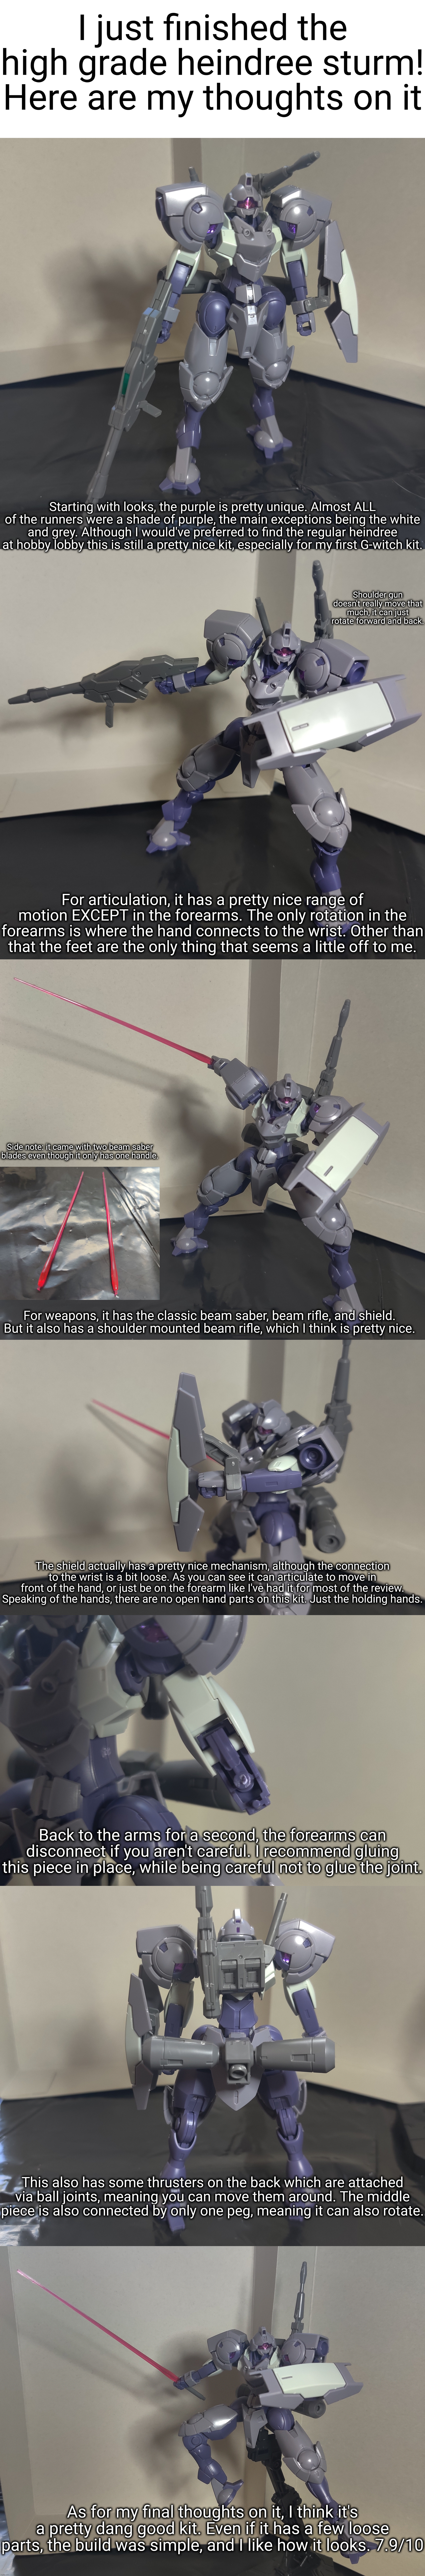 I honestly expected the Gundam aerial or darilbalde to be my first G-witch kit. Destiny Gundam review is on the way | I just finished the high grade heindree sturm! Here are my thoughts on it; Starting with looks, the purple is pretty unique. Almost ALL of the runners were a shade of purple, the main exceptions being the white and grey. Although I would've preferred to find the regular heindree at hobby lobby this is still a pretty nice kit, especially for my first G-witch kit. Shoulder gun doesn't really move that much, it can just rotate forward and back. For articulation, it has a pretty nice range of motion EXCEPT in the forearms. The only rotation in the forearms is where the hand connects to the wrist. Other than that the feet are the only thing that seems a little off to me. Side note: it came with two beam saber blades even though it only has one handle. For weapons, it has the classic beam saber, beam rifle, and shield. But it also has a shoulder mounted beam rifle, which I think is pretty nice. The shield actually has a pretty nice mechanism, although the connection to the wrist is a bit loose. As you can see it can articulate to move in front of the hand, or just be on the forearm like I've had it for most of the review. Speaking of the hands, there are no open hand parts on this kit. Just the holding hands. Back to the arms for a second, the forearms can disconnect if you aren't careful. I recommend gluing this piece in place, while being careful not to glue the joint. This also has some thrusters on the back which are attached via ball joints, meaning you can move them around. The middle piece is also connected by only one peg, meaning it can also rotate. As for my final thoughts on it, I think it's a pretty dang good kit. Even if it has a few loose parts, the build was simple, and I like how it looks. 7.9/10 | image tagged in blank white template,gundam review | made w/ Imgflip meme maker